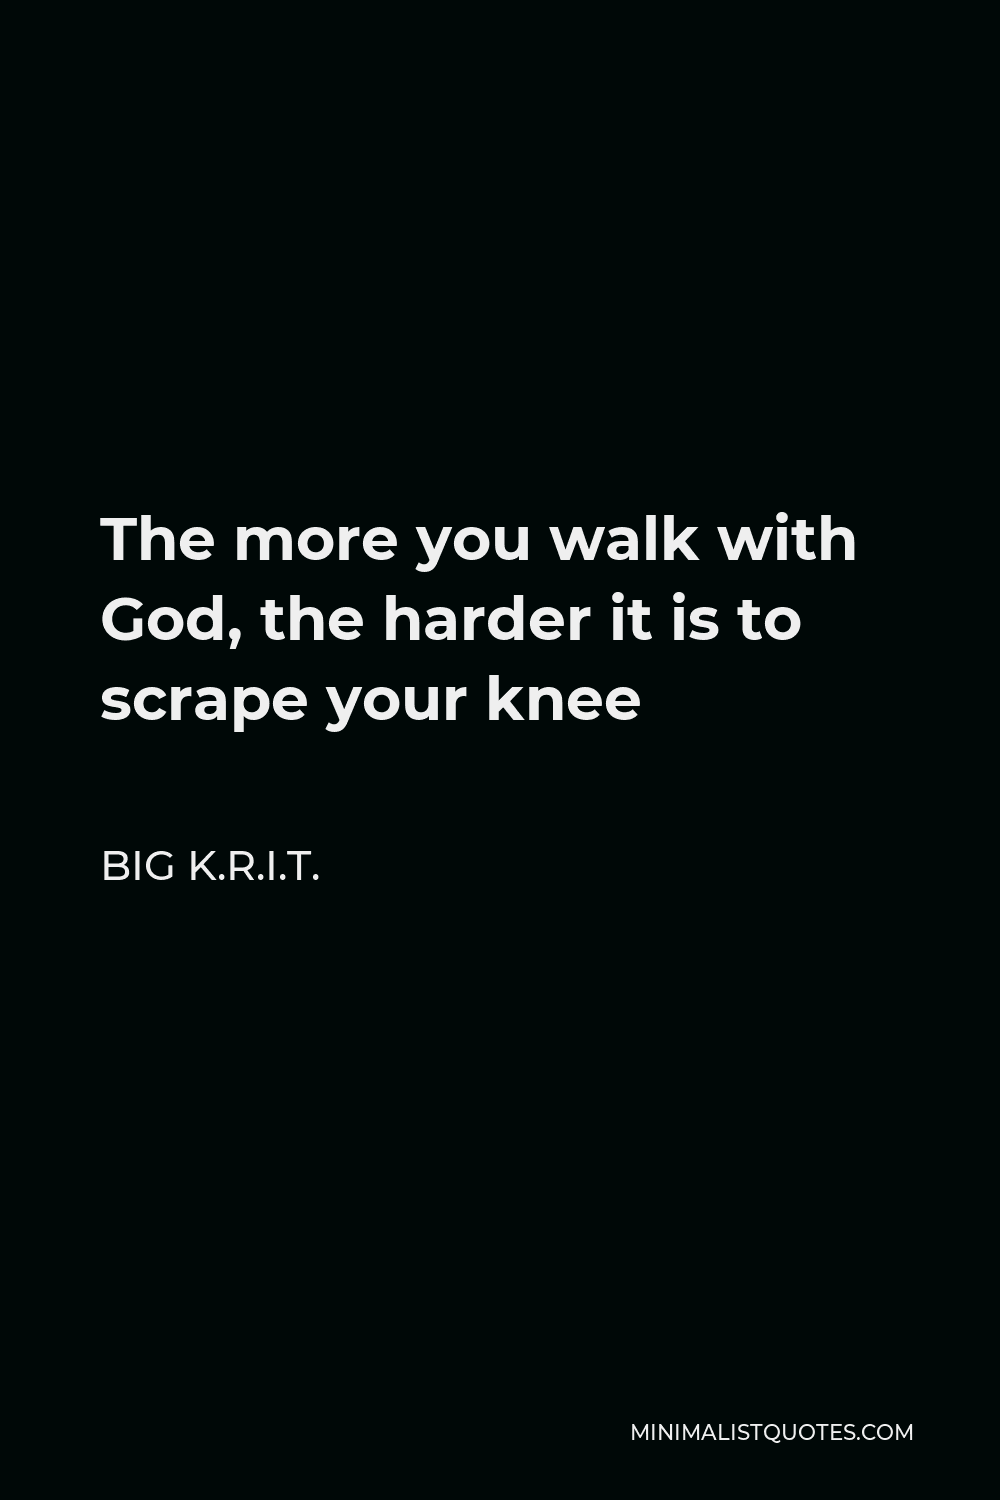 Big K.R.I.T. Quote - The more you walk with God, the harder it is to scrape your knee